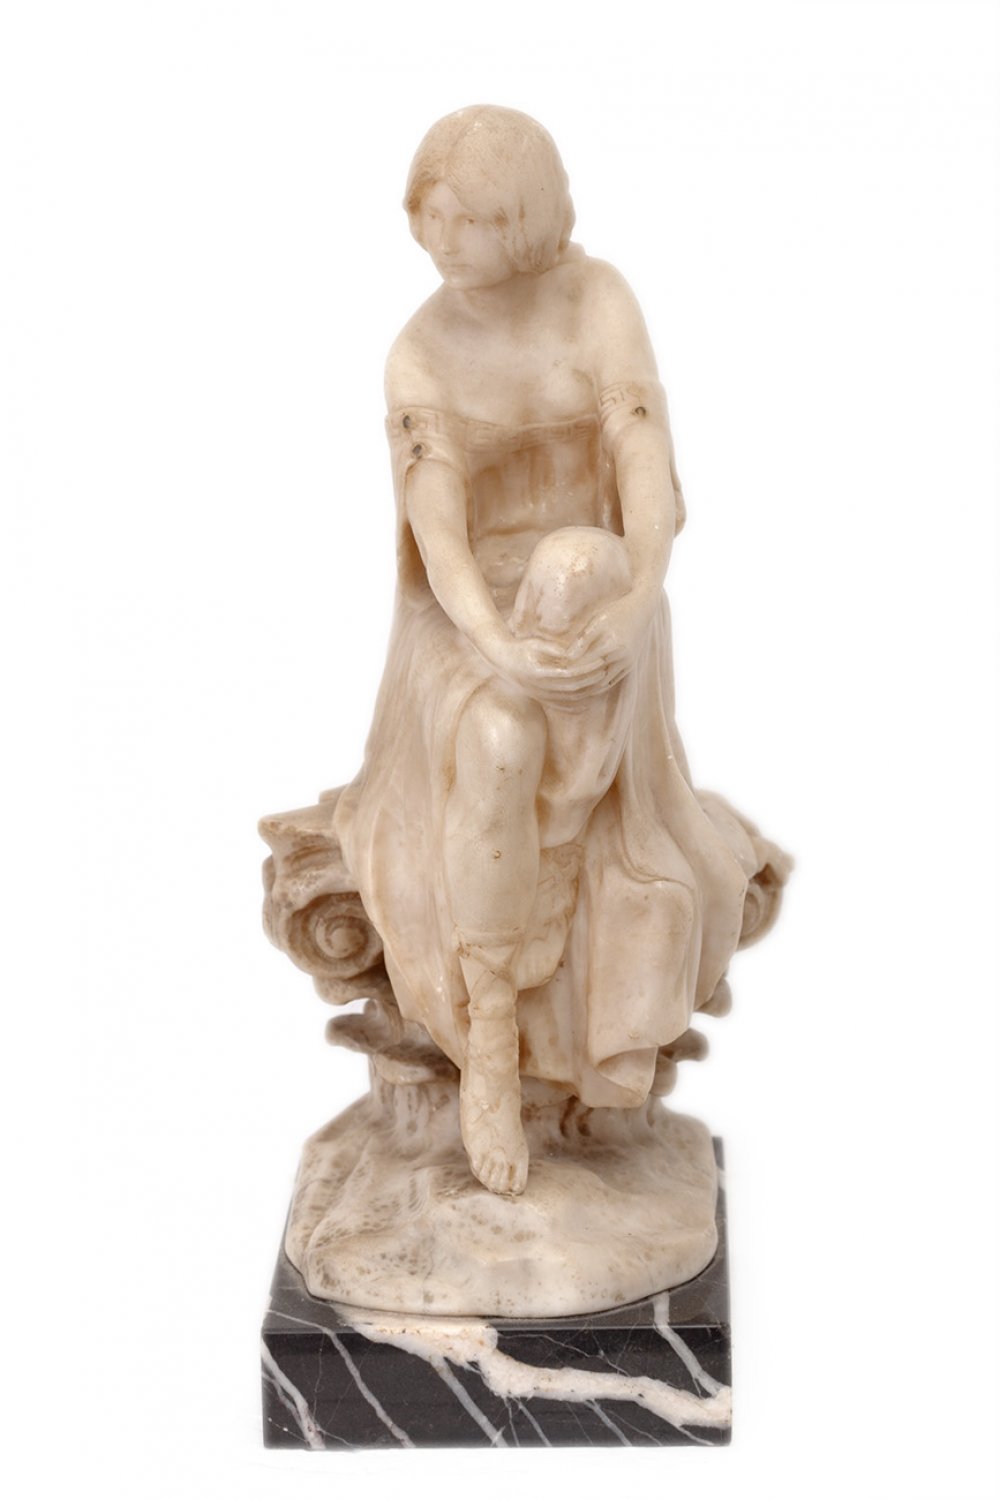 RUDOLF MARCUSE (Berlin, 1878 - London, 1929)."Junge Griechin, (1905).Sculpture in alabaster.Signed - Image 5 of 7